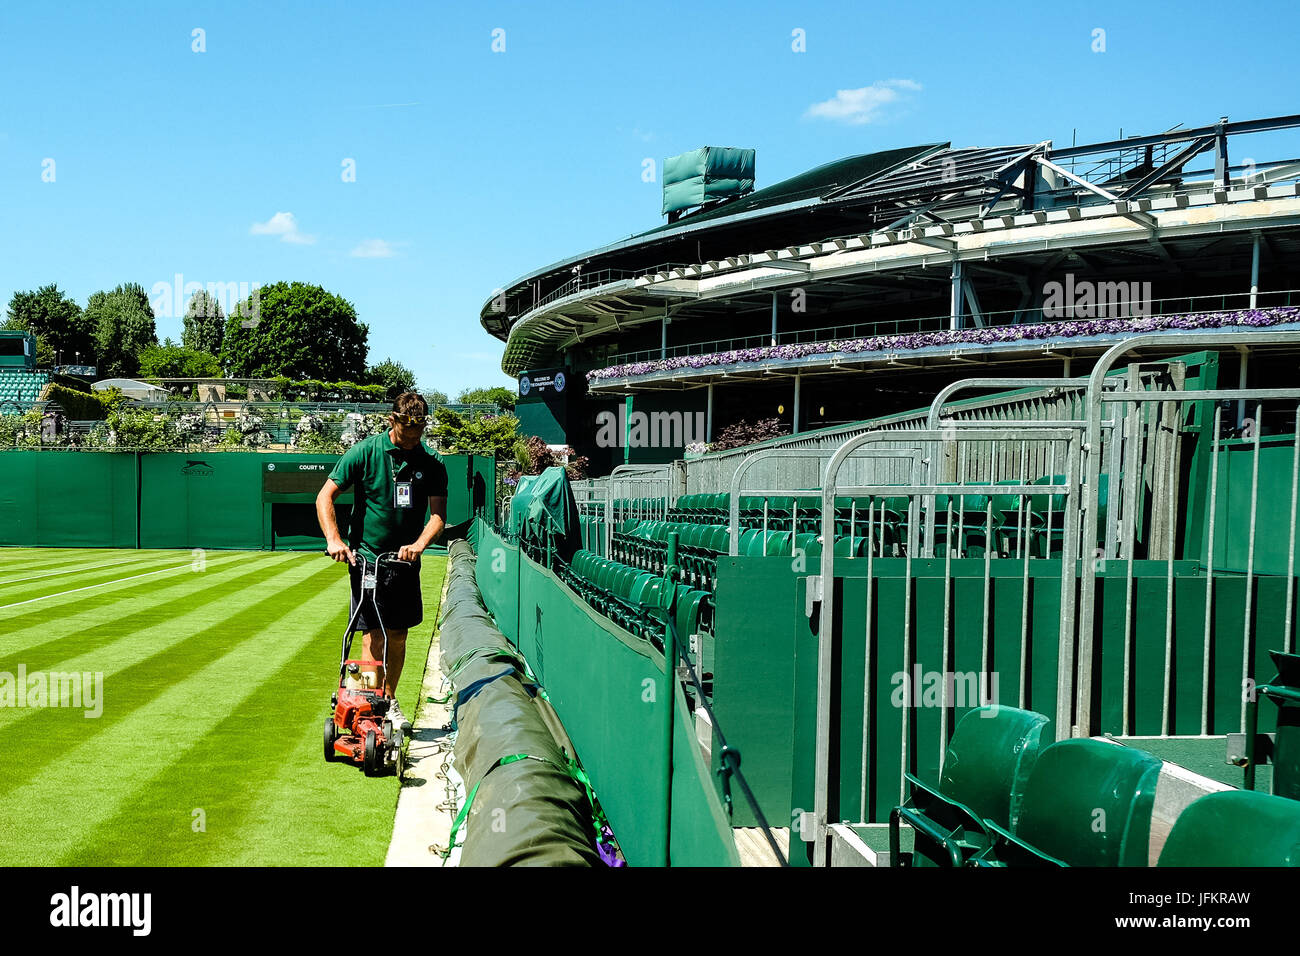 London, Great Britain, 2ndJuly 2017:Final preparations before the Wimbledon Tennis Championships 2017 at the All England Lawn Tennis and Croquet Club in London. Credit: Frank Molter/Alamy Live News Stock Photo